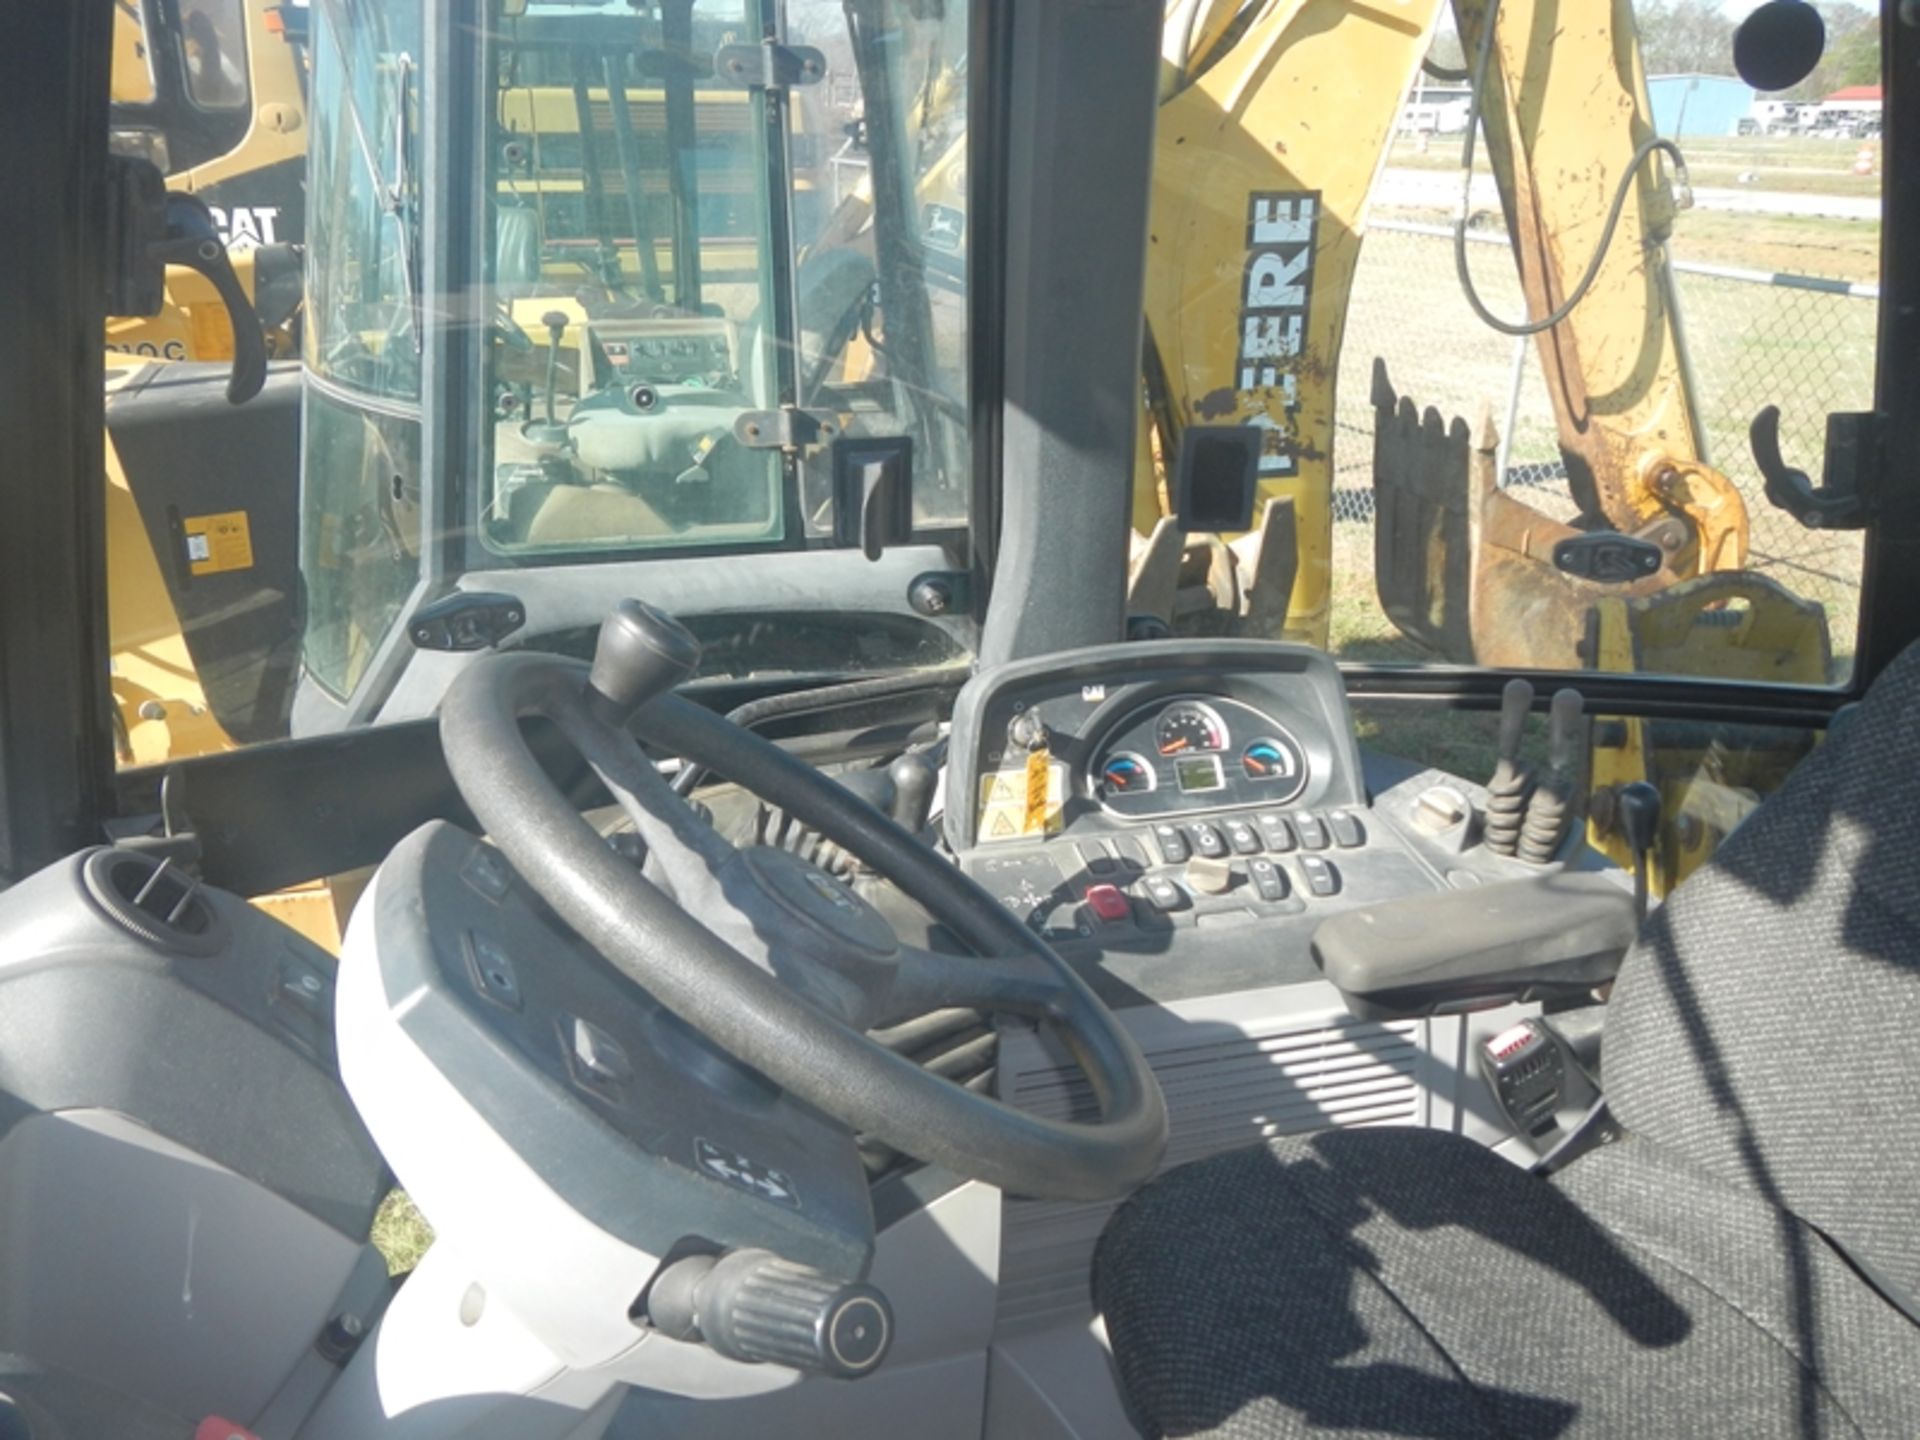 2012 CAT 420F backhoe/loader with cab, 4WD, cab, extendahoe with thumb, 4in1 front bucket, with - Image 9 of 9